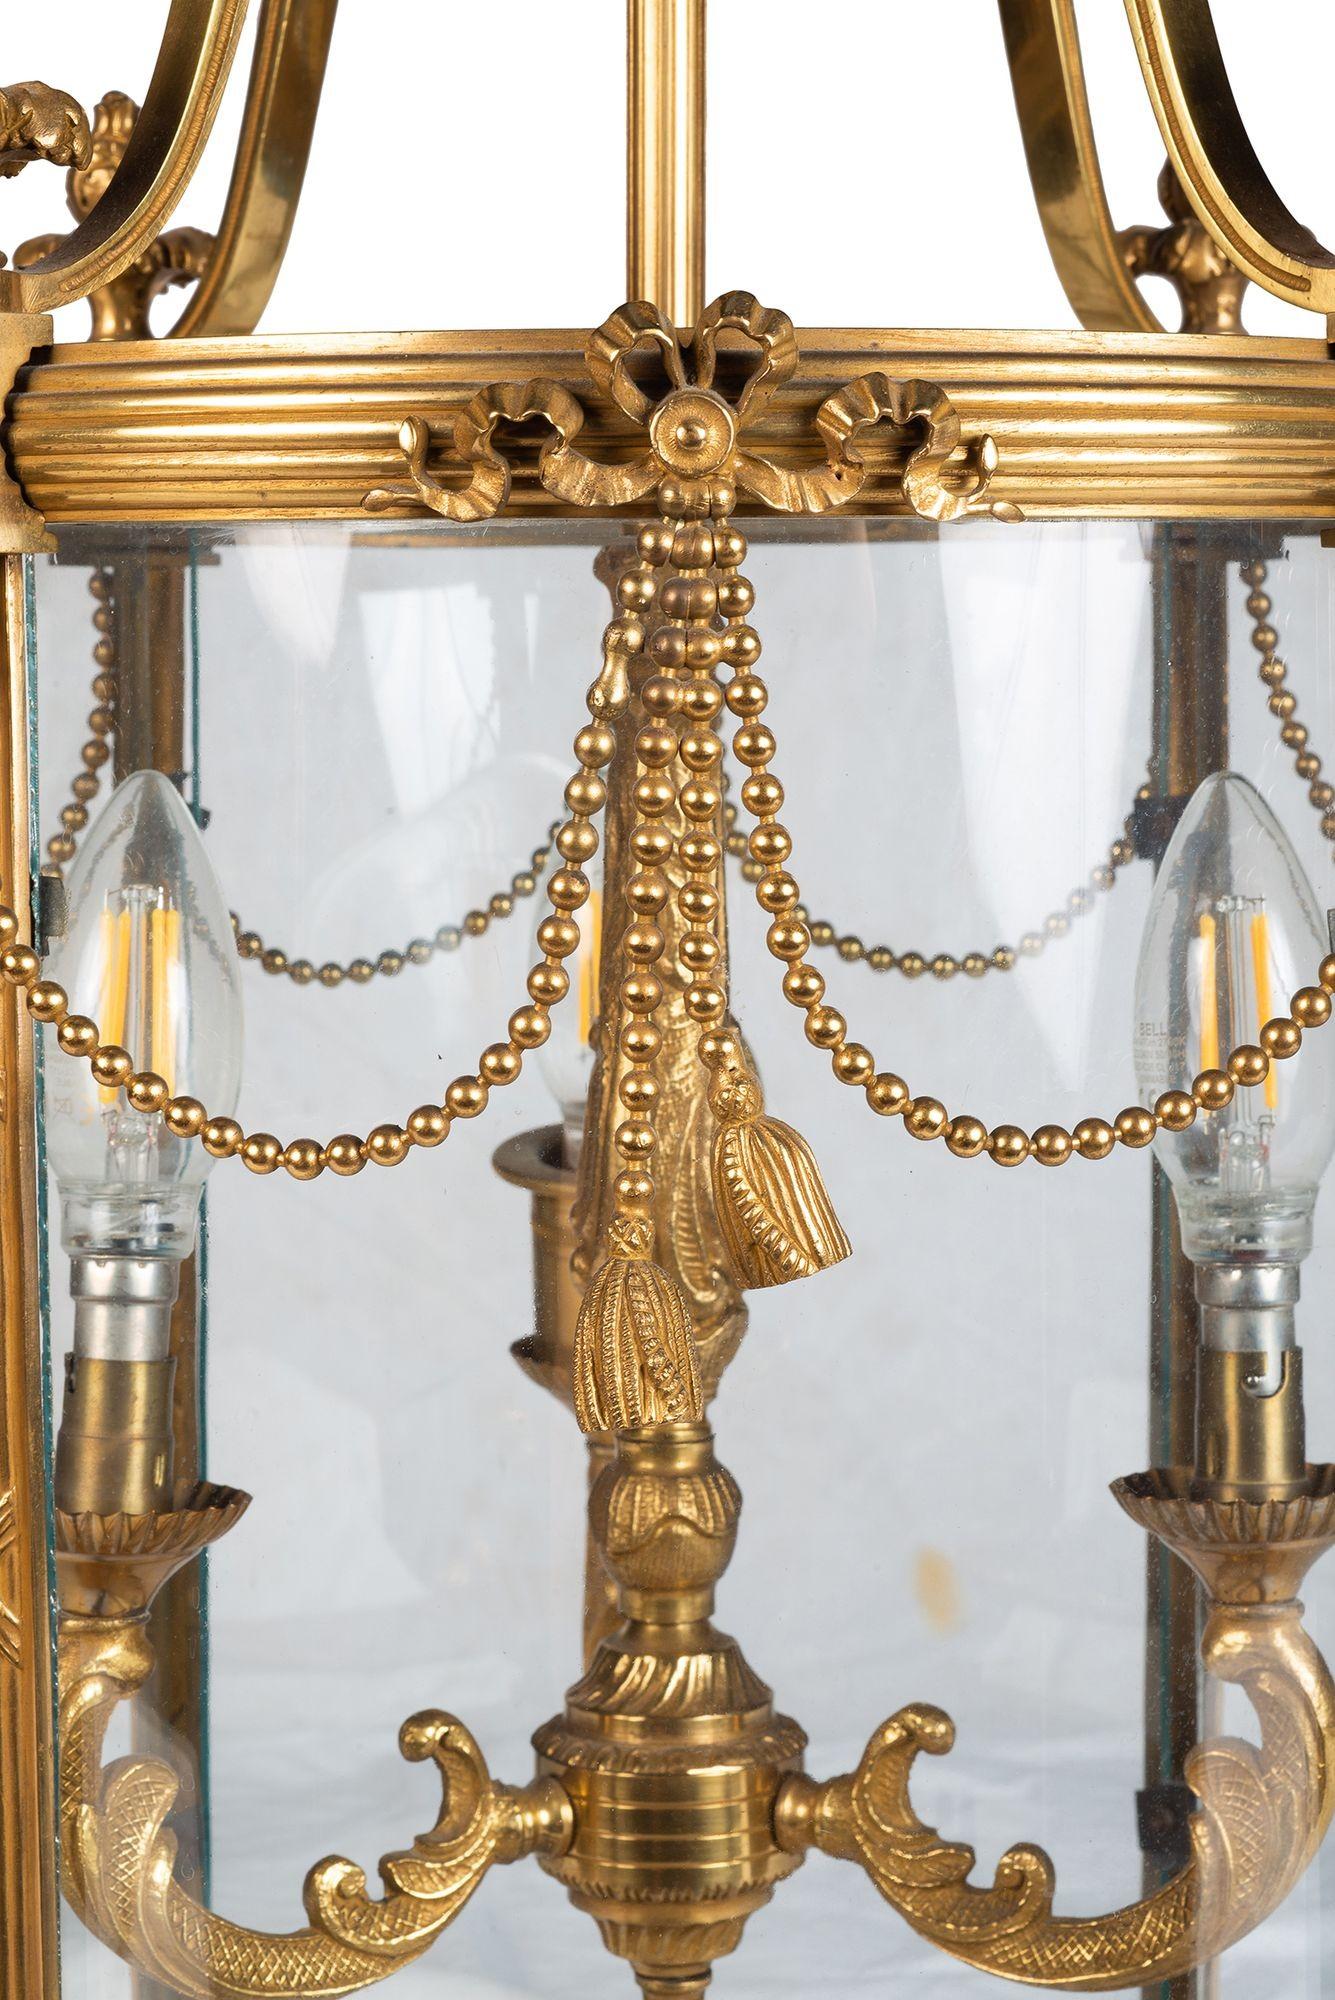 Regency style gilded ormolu Hall Lantern, having finials, needed drapes, tassels and ribbon decoration. Bowed glass pains and a three branch candle sconce, wired for electricity.


Batch 74 62277 LNYZ